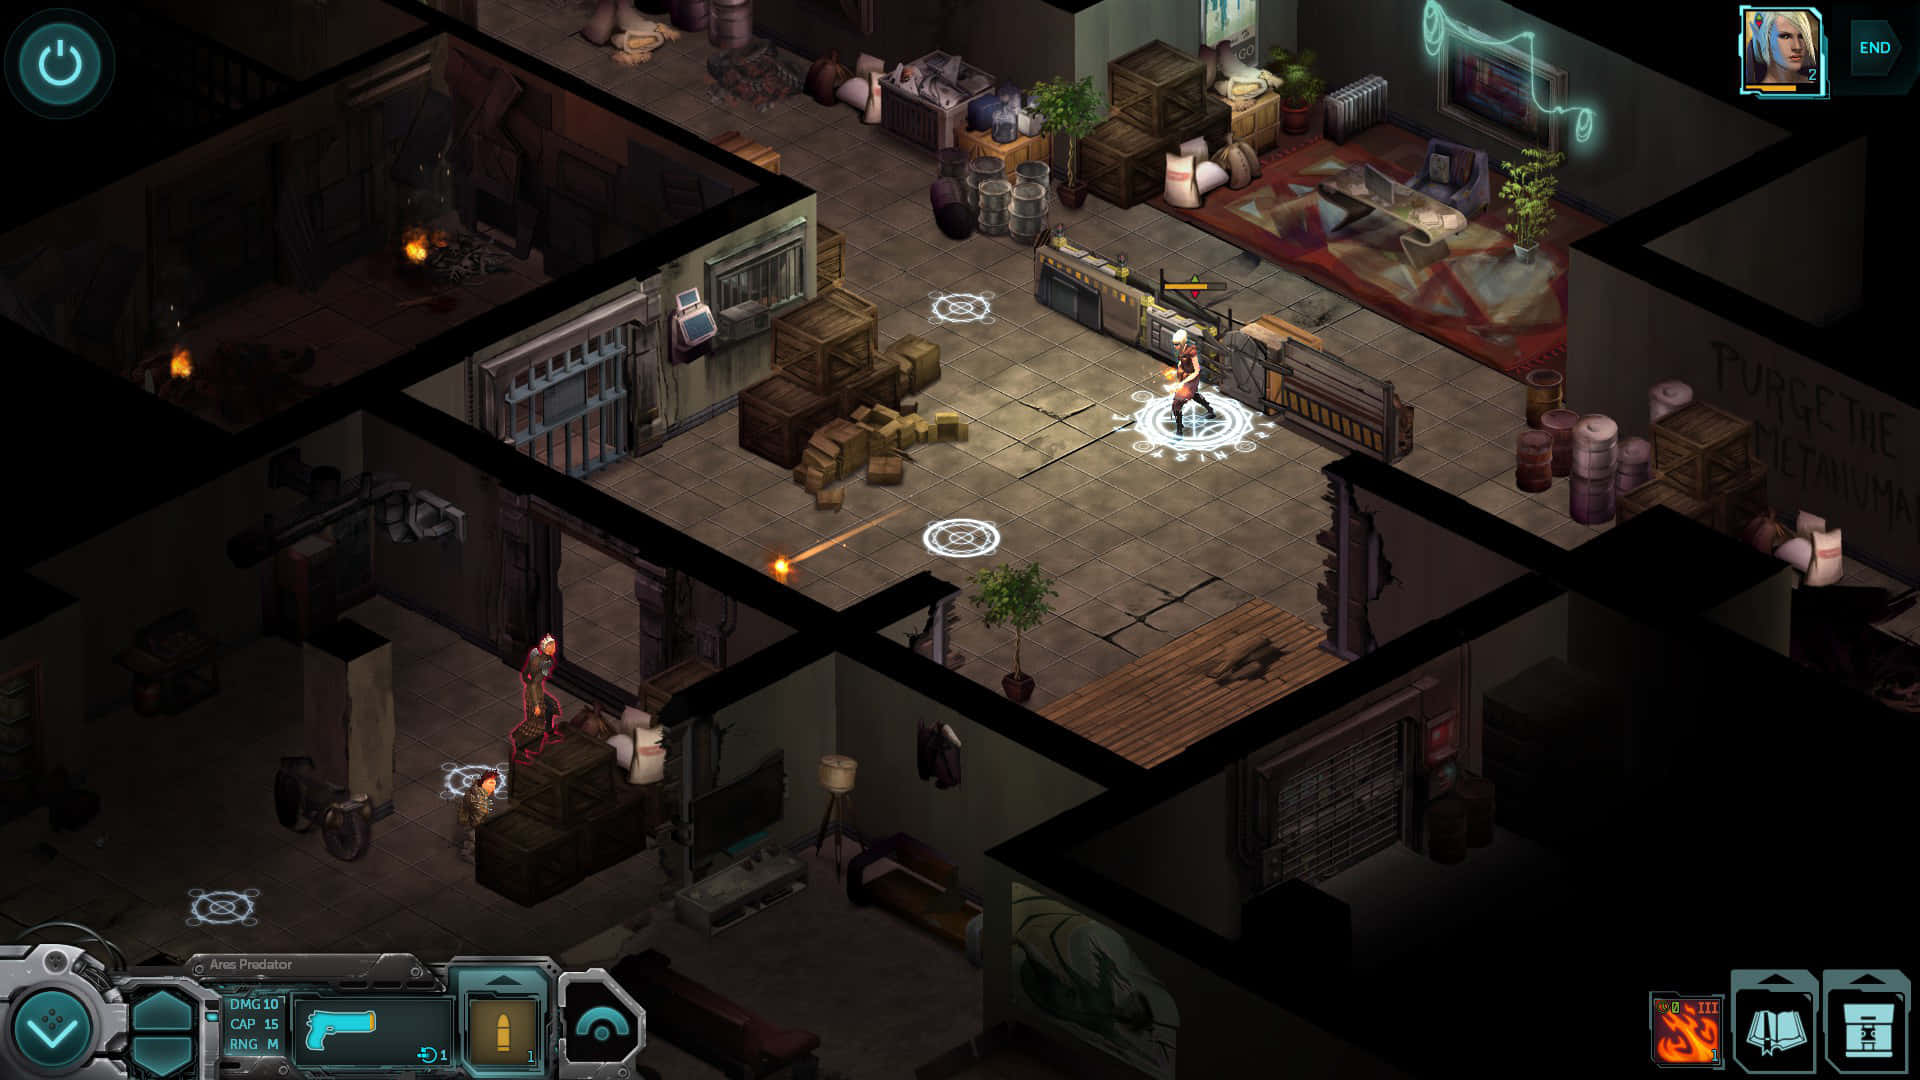 Enter the world of Shadowrun with your team Wallpaper